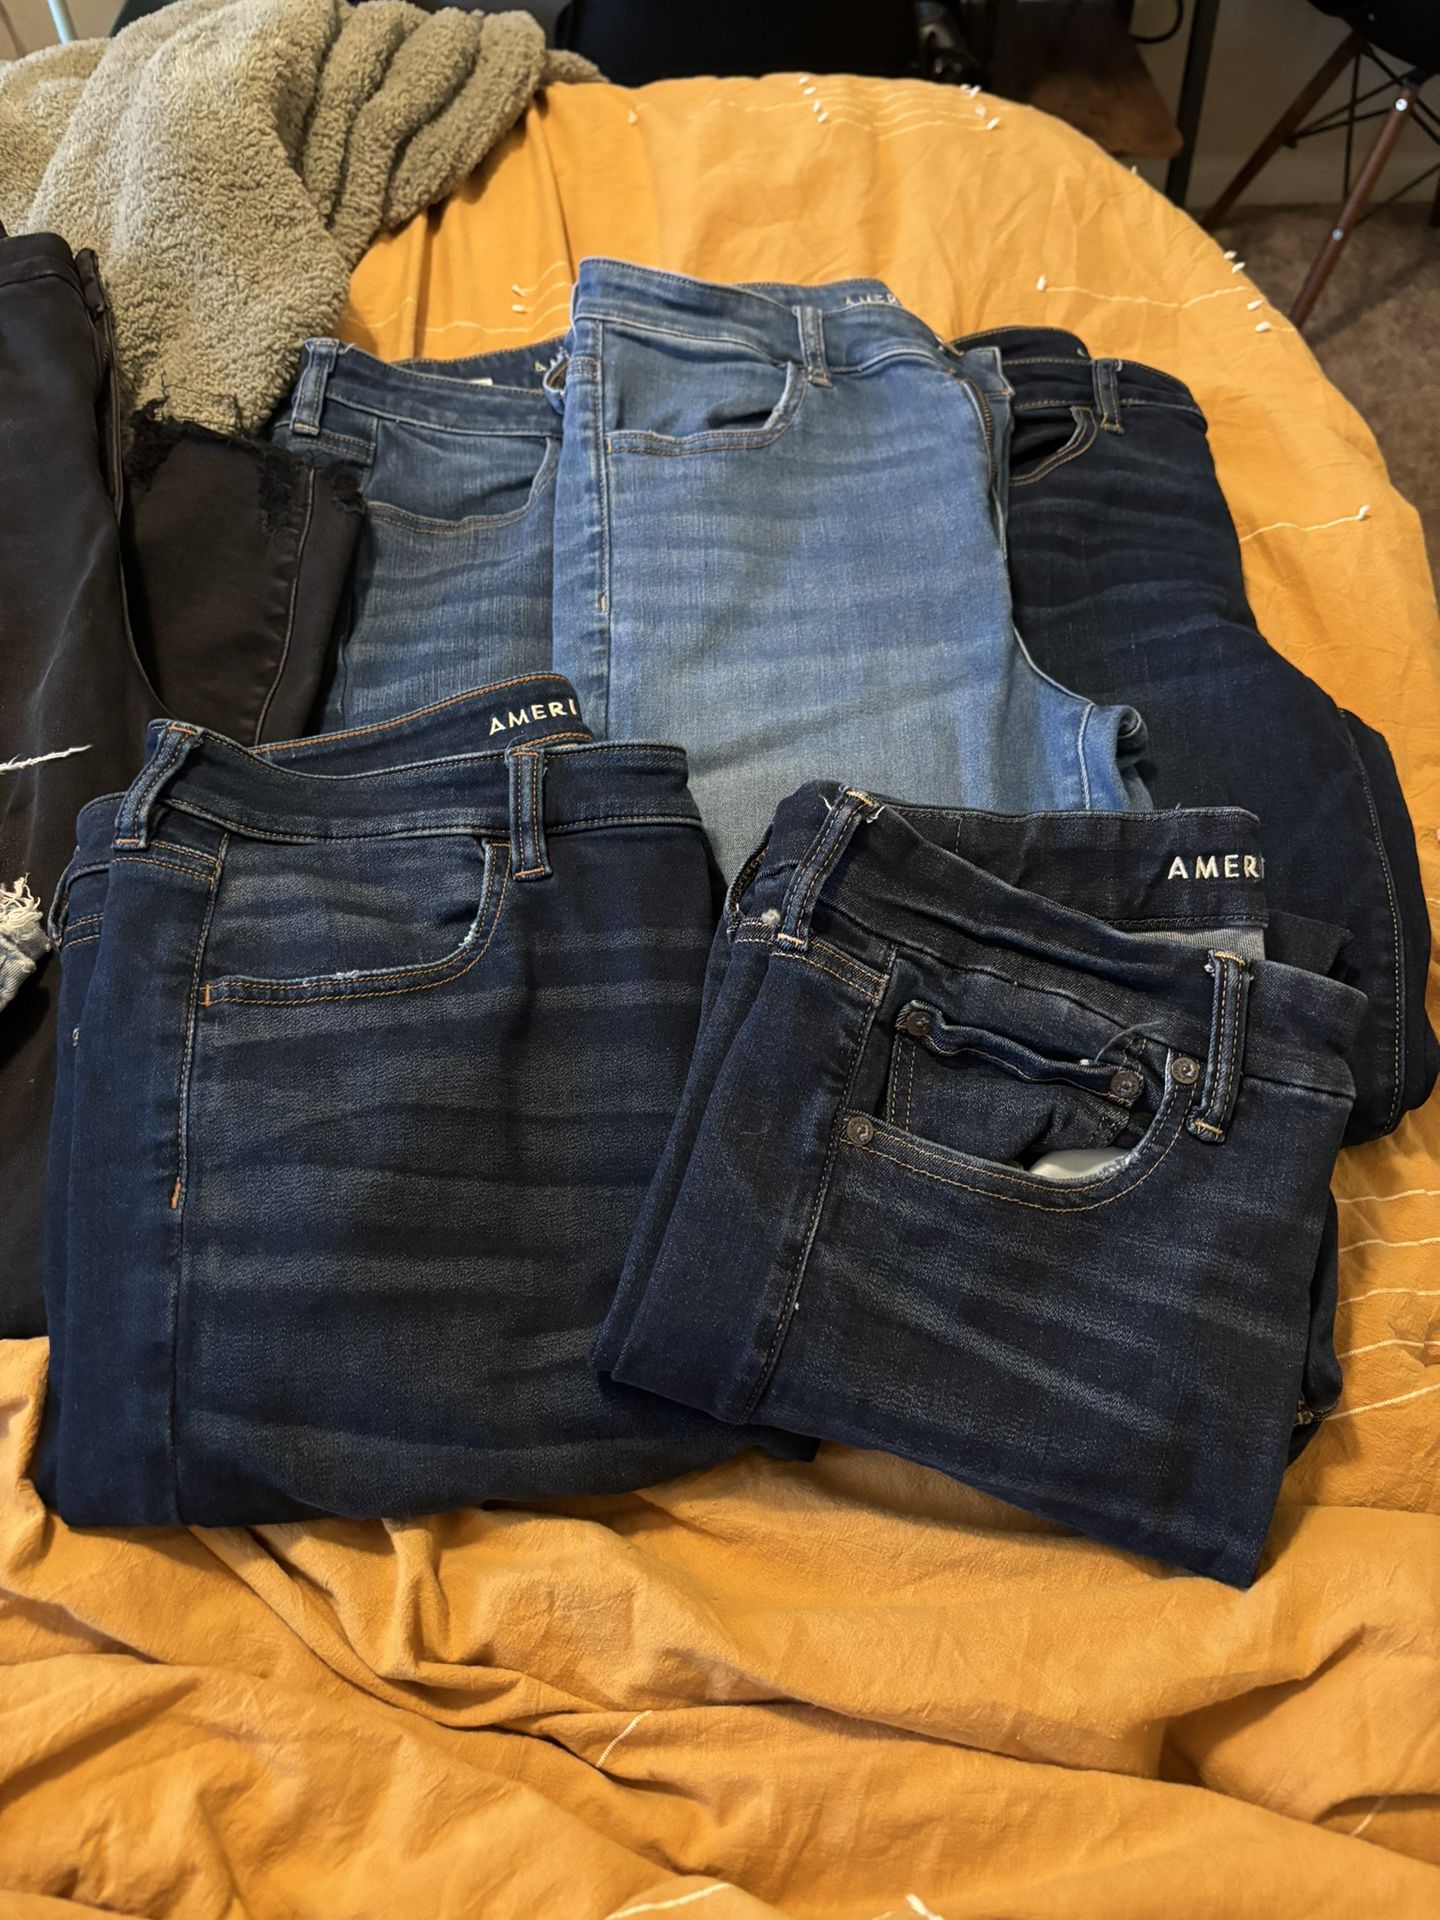 American Eagle Jeans(Size 12)